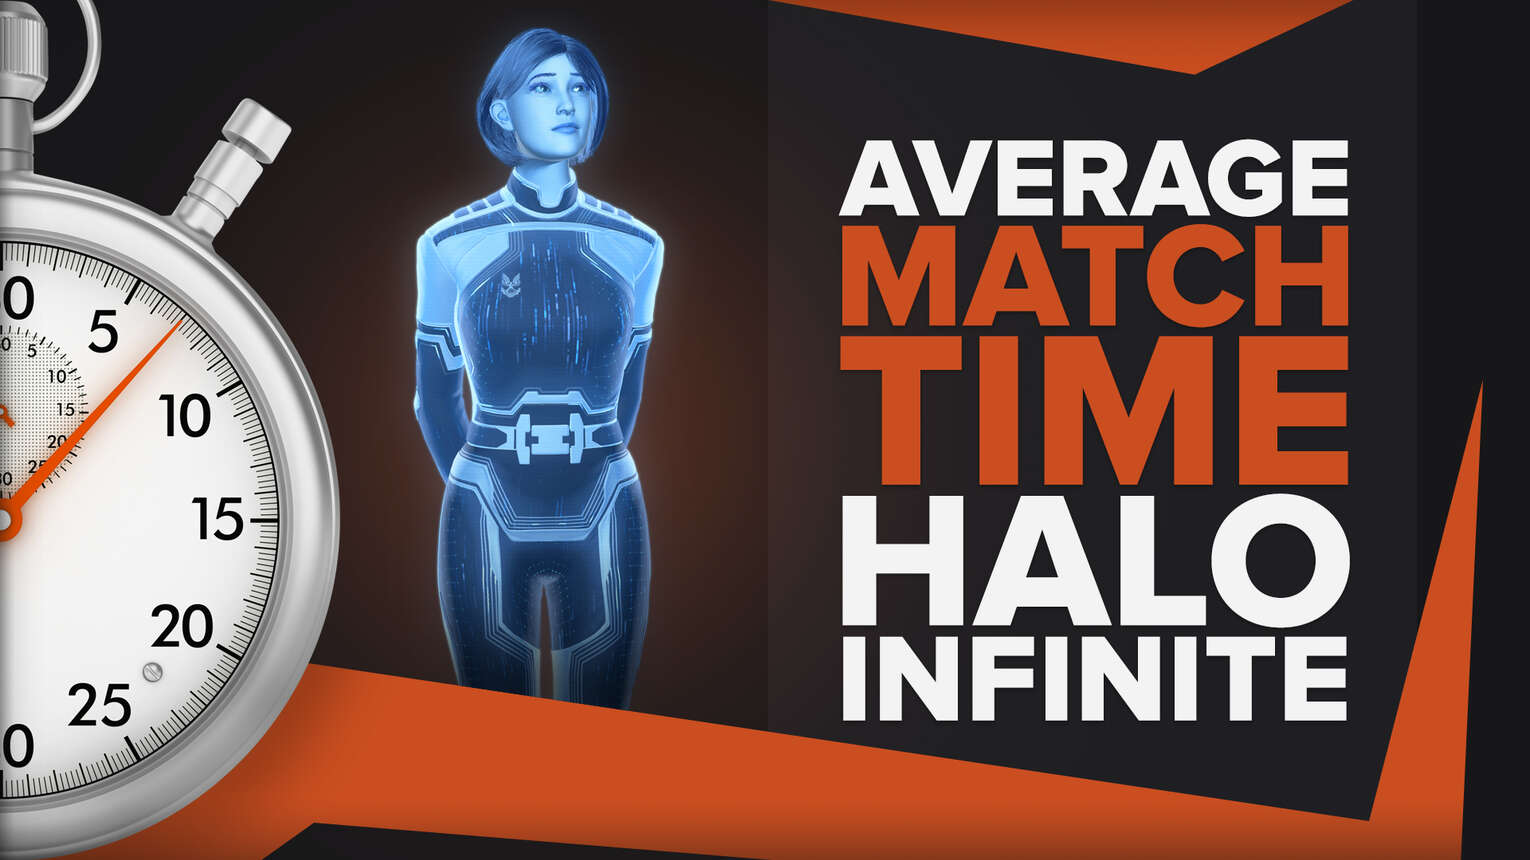 What's The Average Match Length Of Halo Infinite?